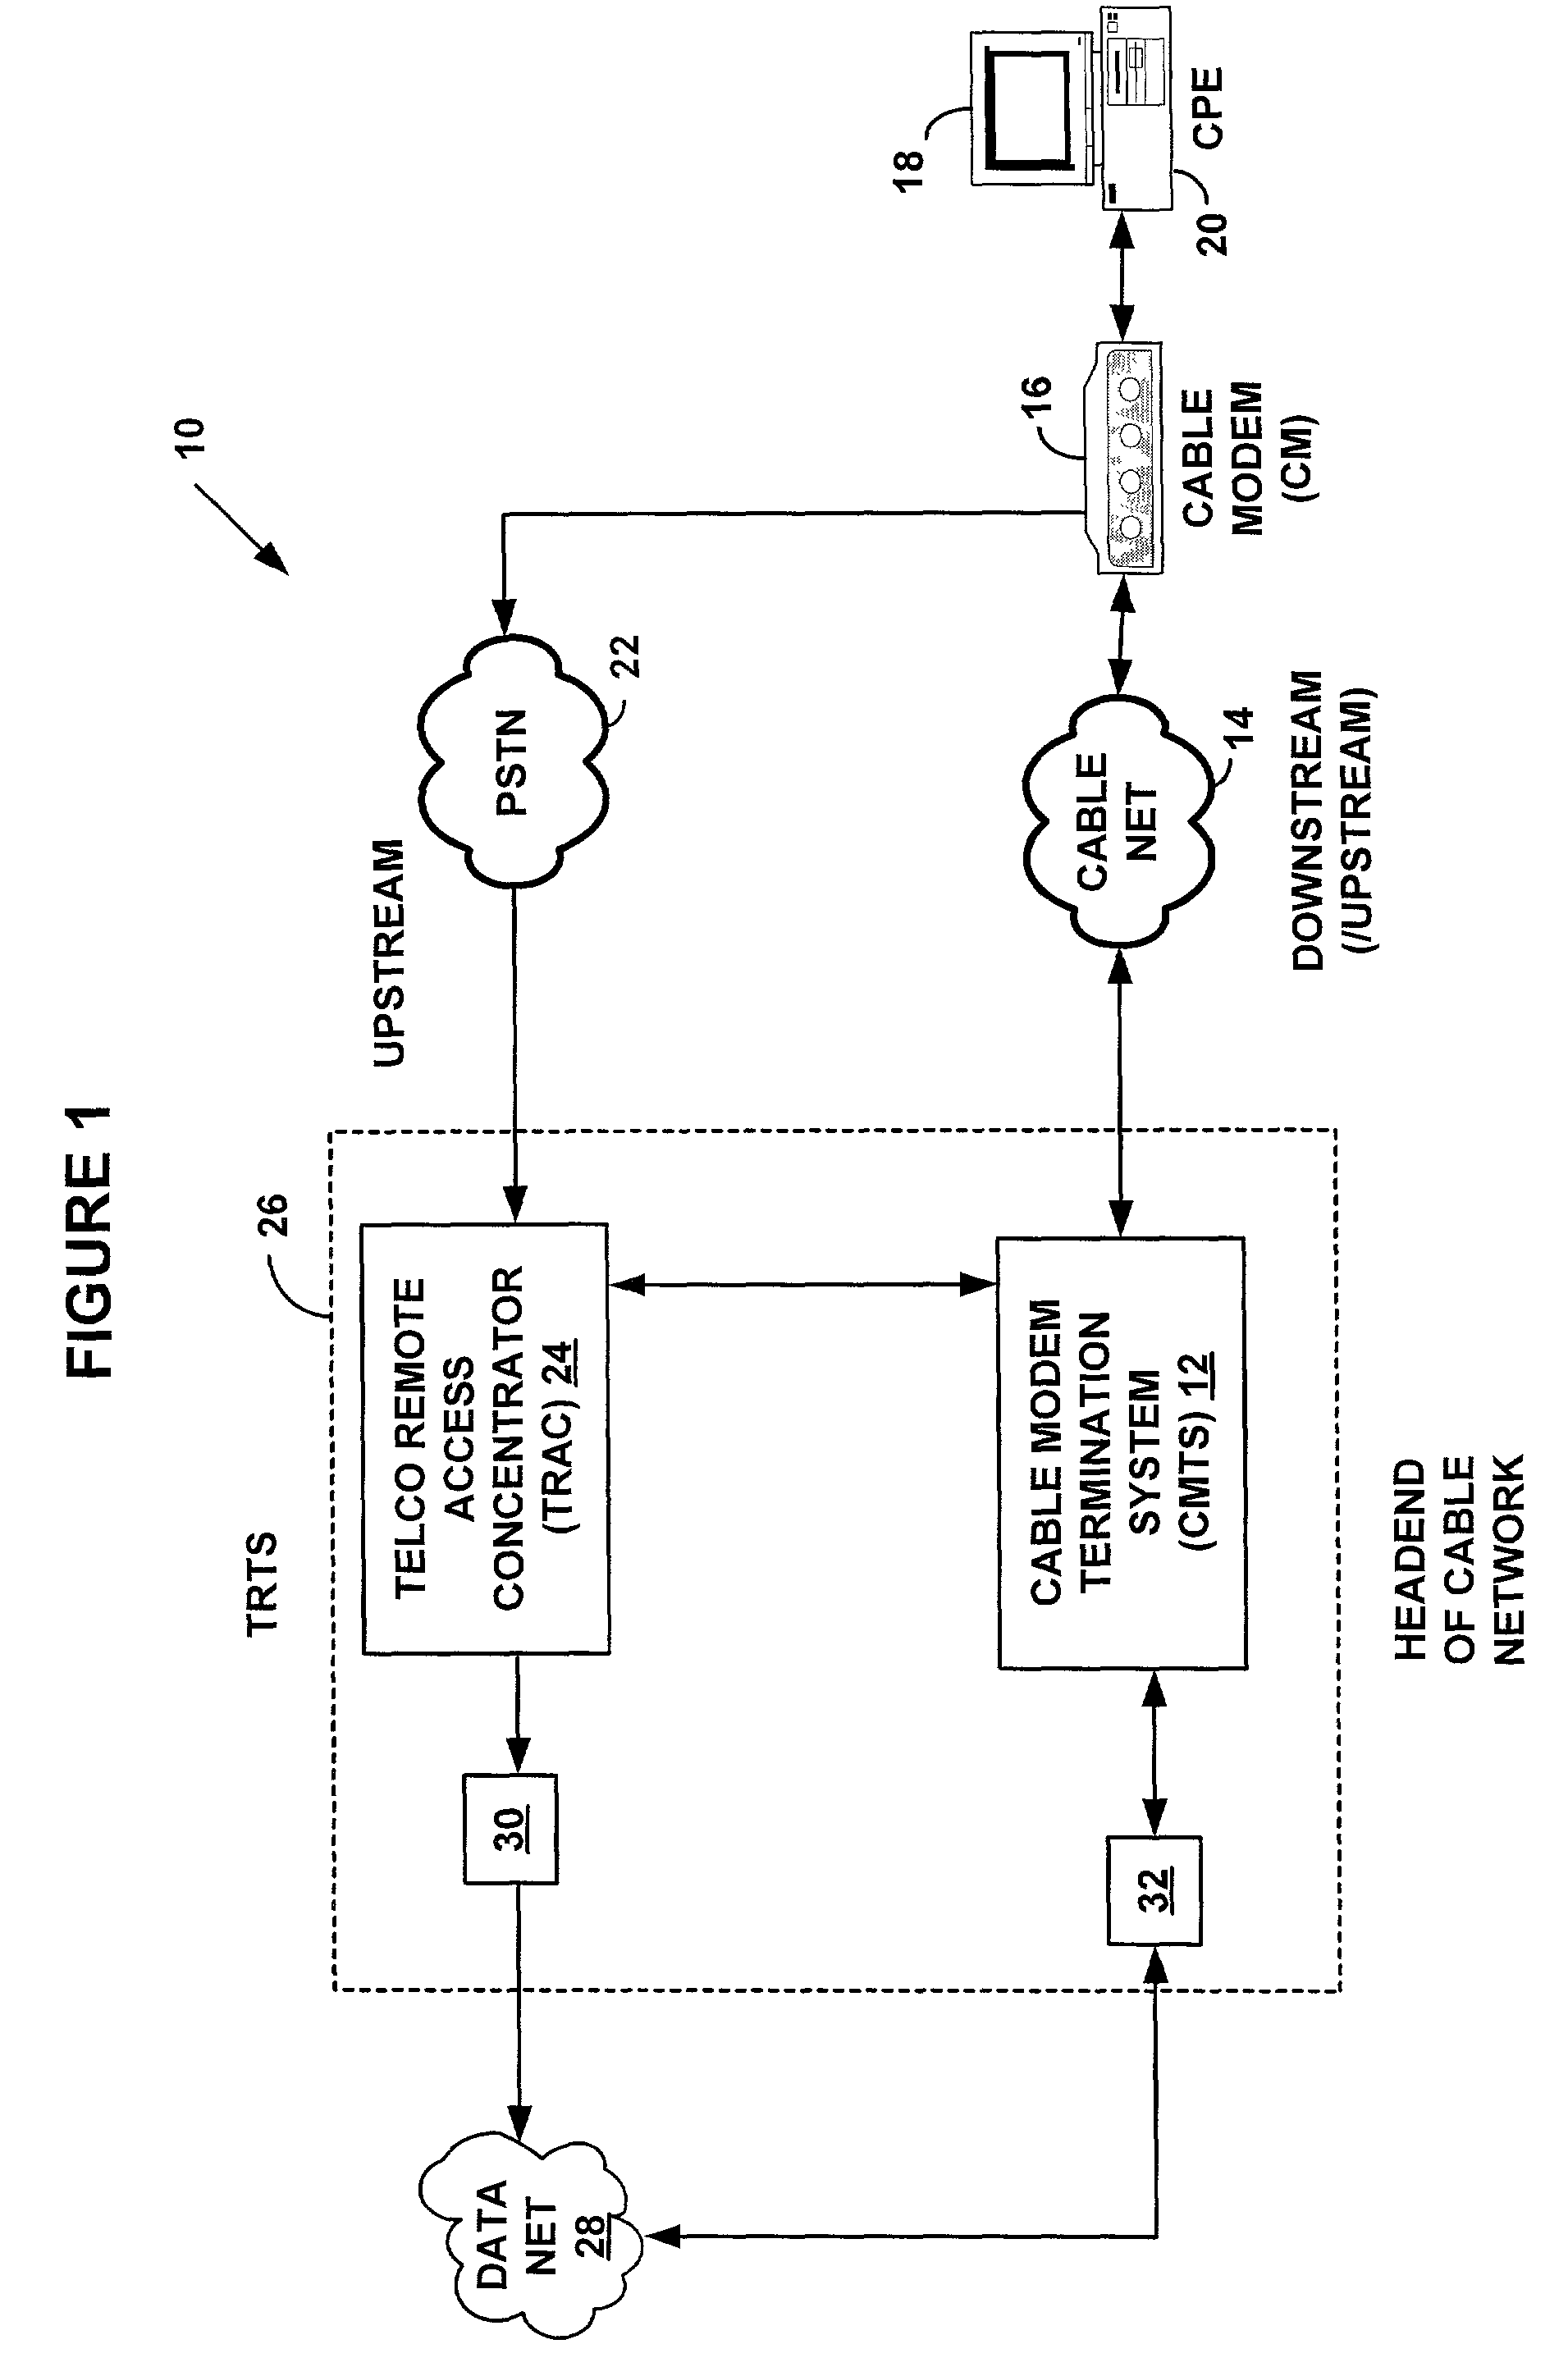 System and method for automatic digital certificate installation on a network device in a data-over-cable system